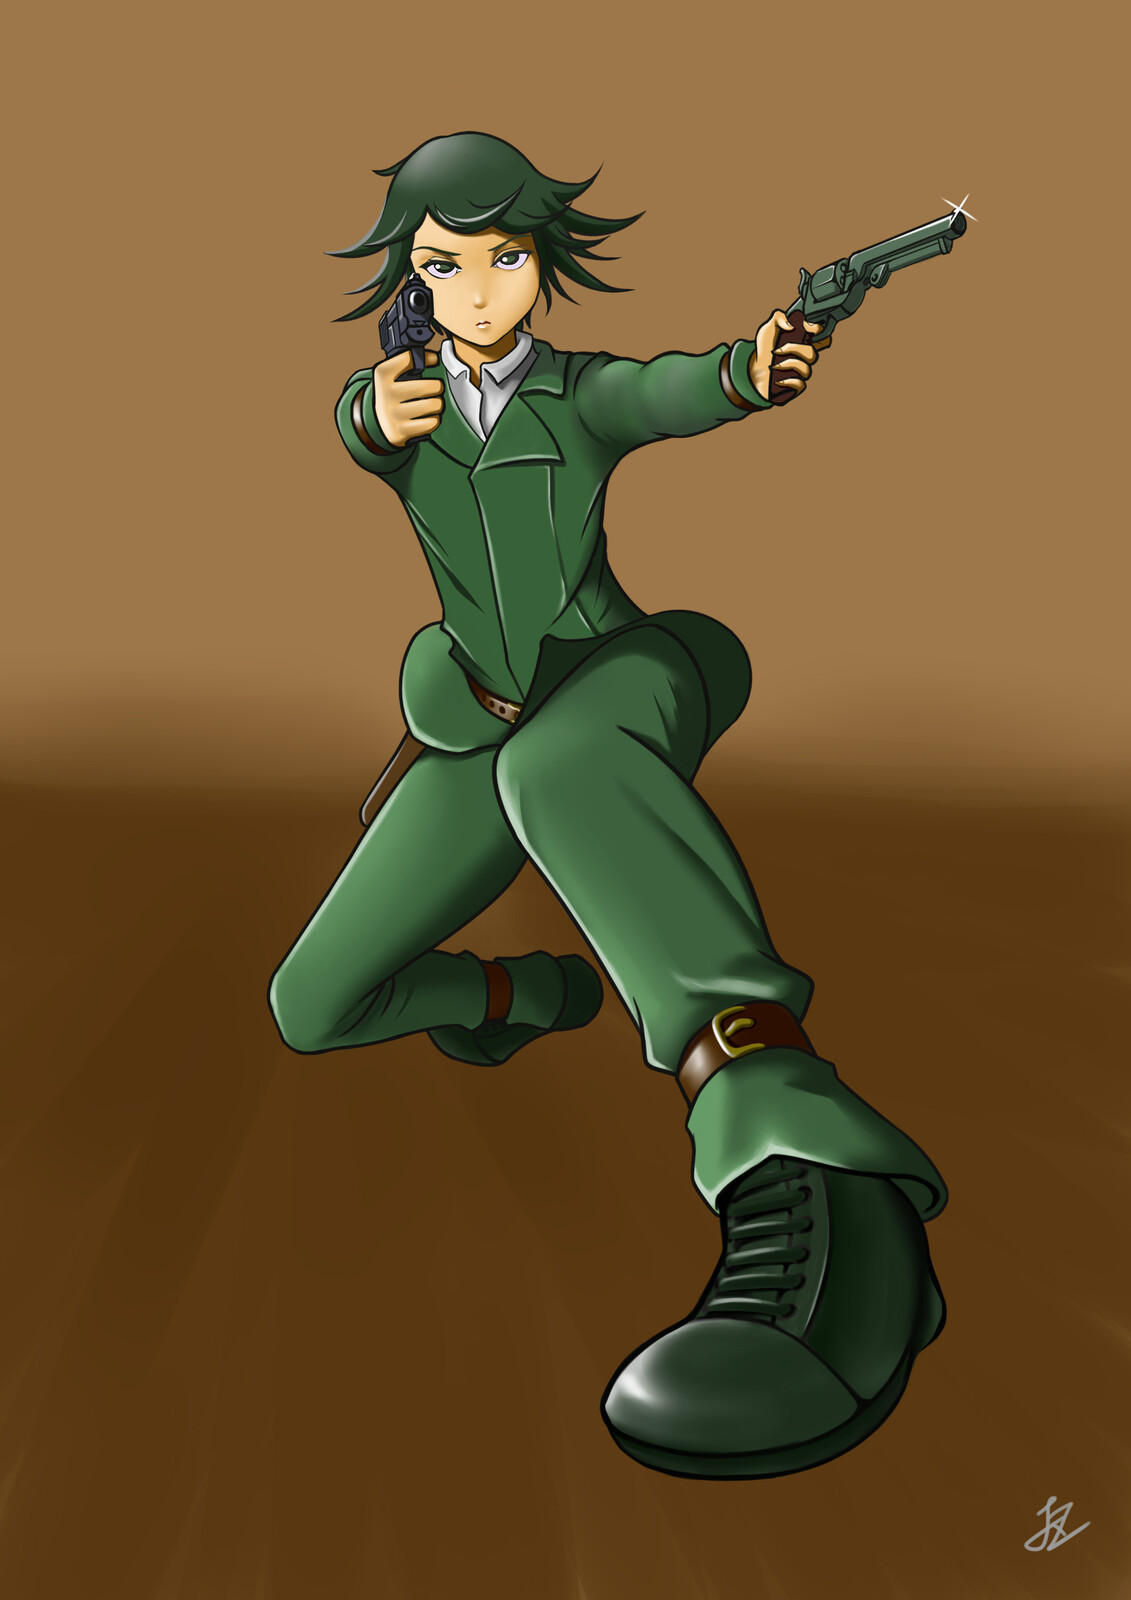 Fan art of Kino from anime Kino's Journey. A commission ordered by my partner.